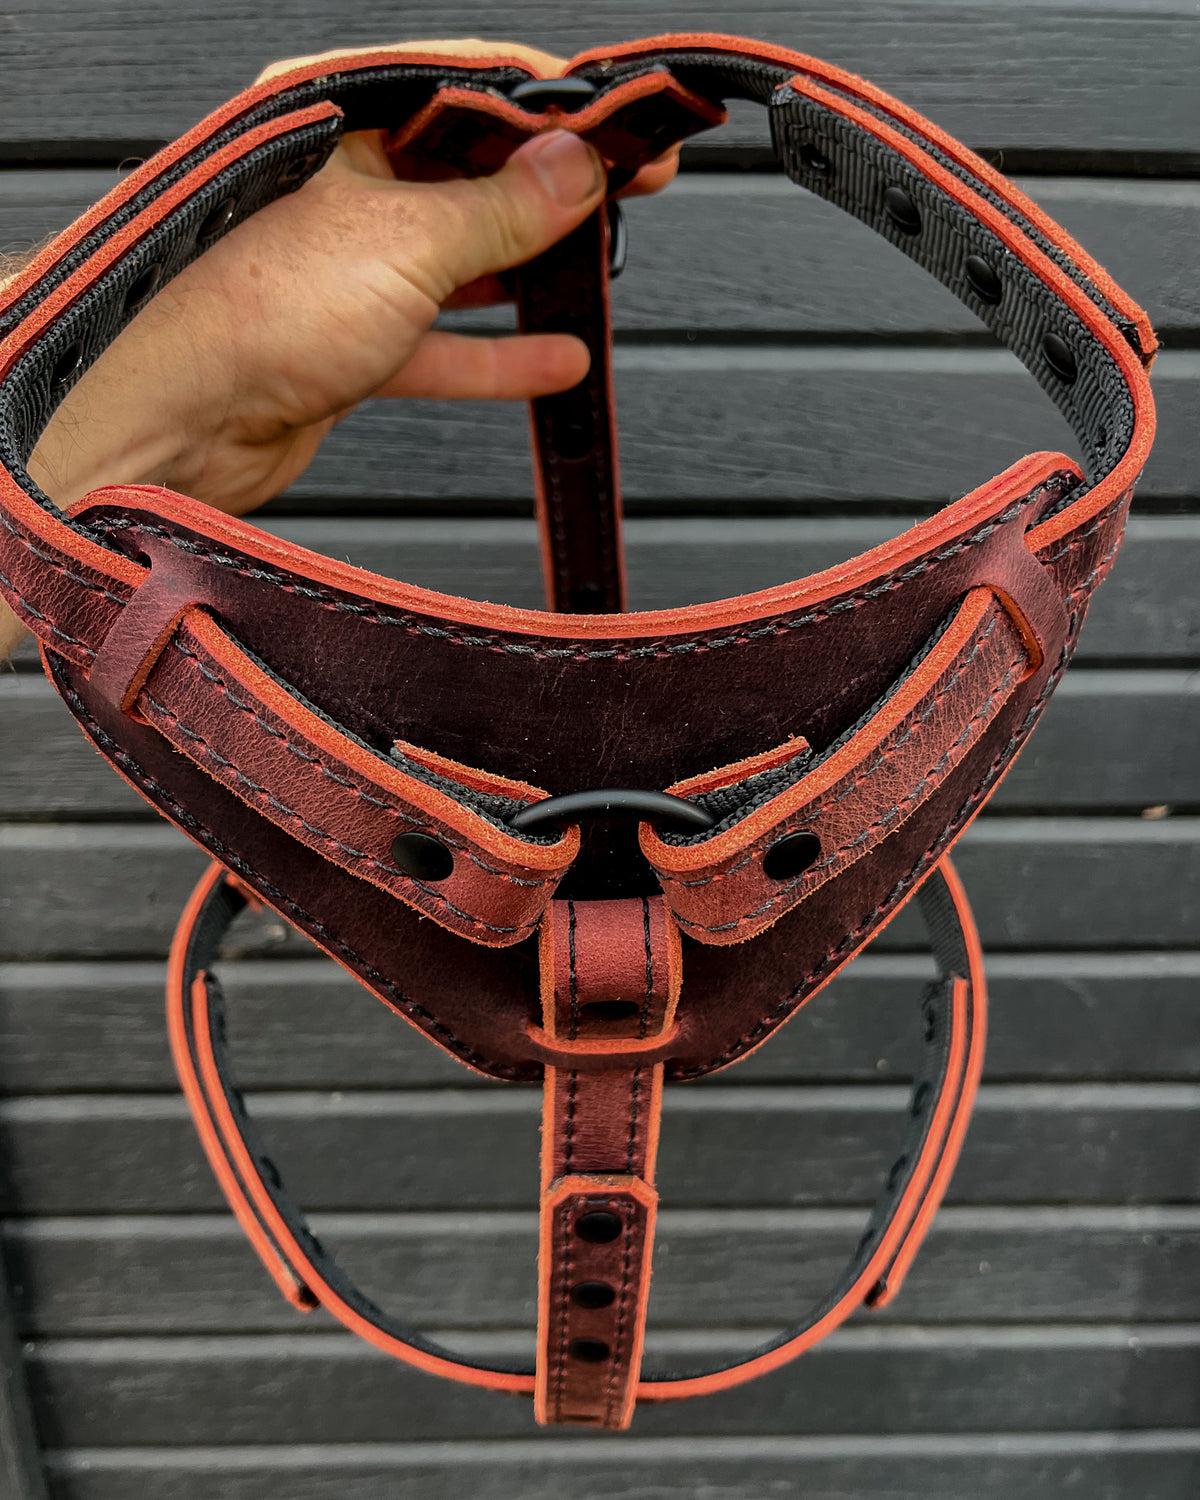 The OxBlood Renegade Harness